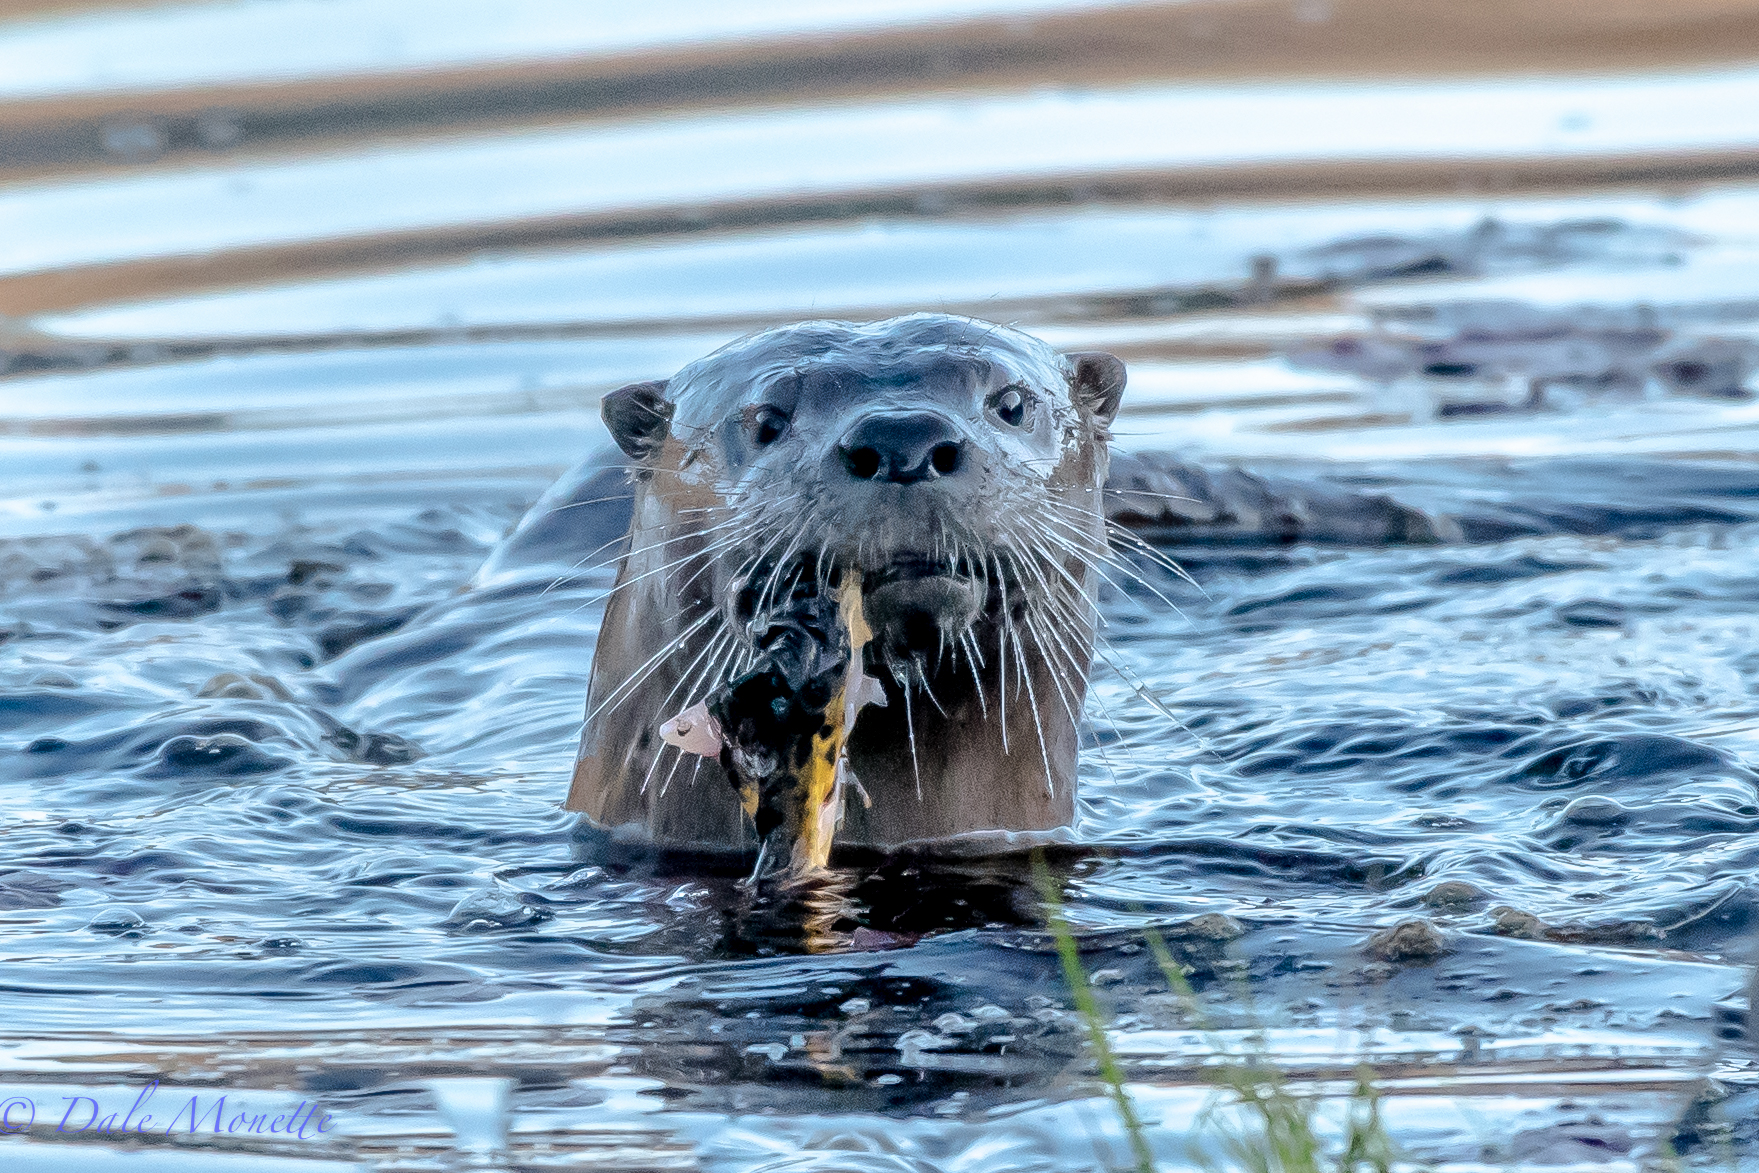   This otter invited me to breakfast. &nbsp;Luck for him I dont like sushi. &nbsp;All the more for him. &nbsp;At least he offered....  